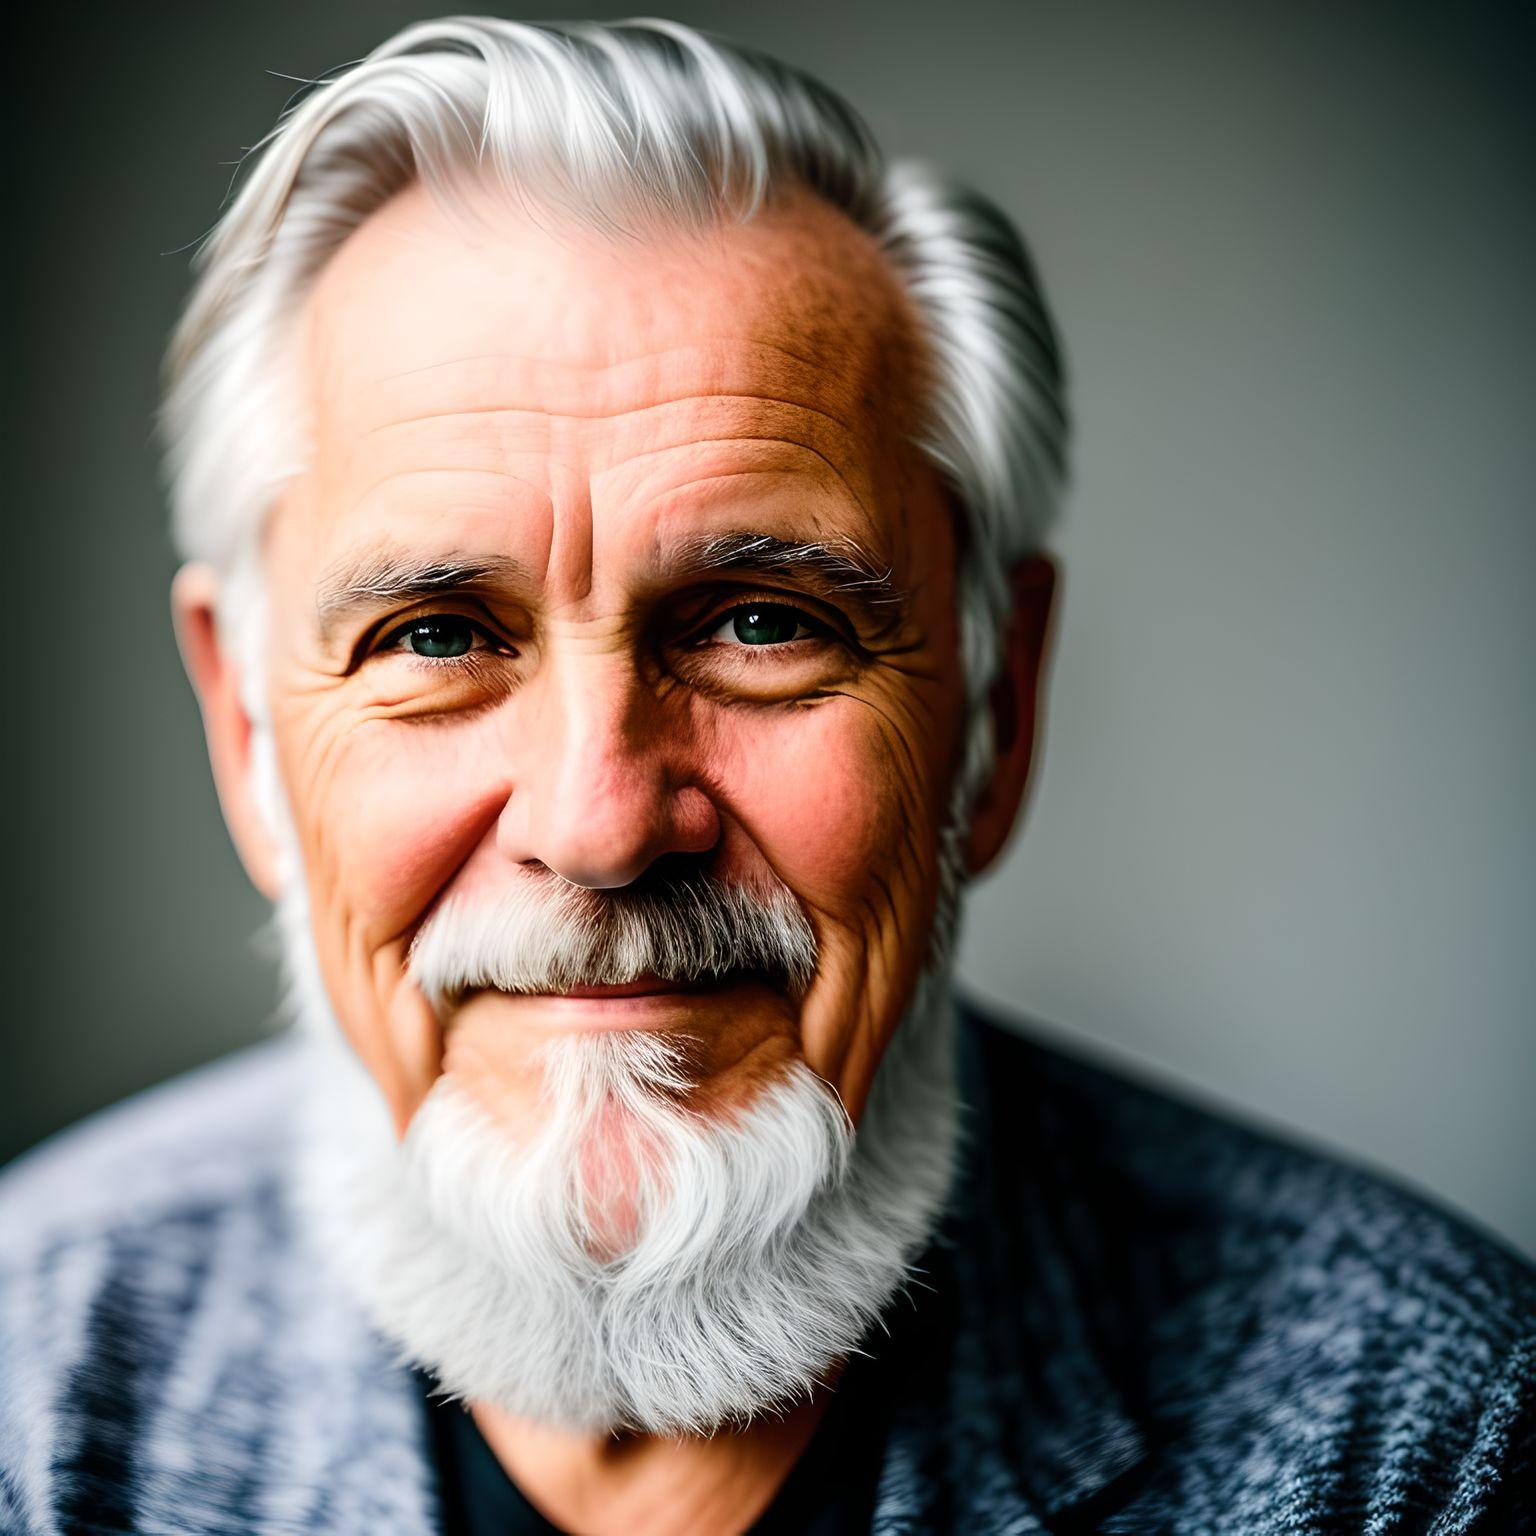 an old man portrait with silver hair